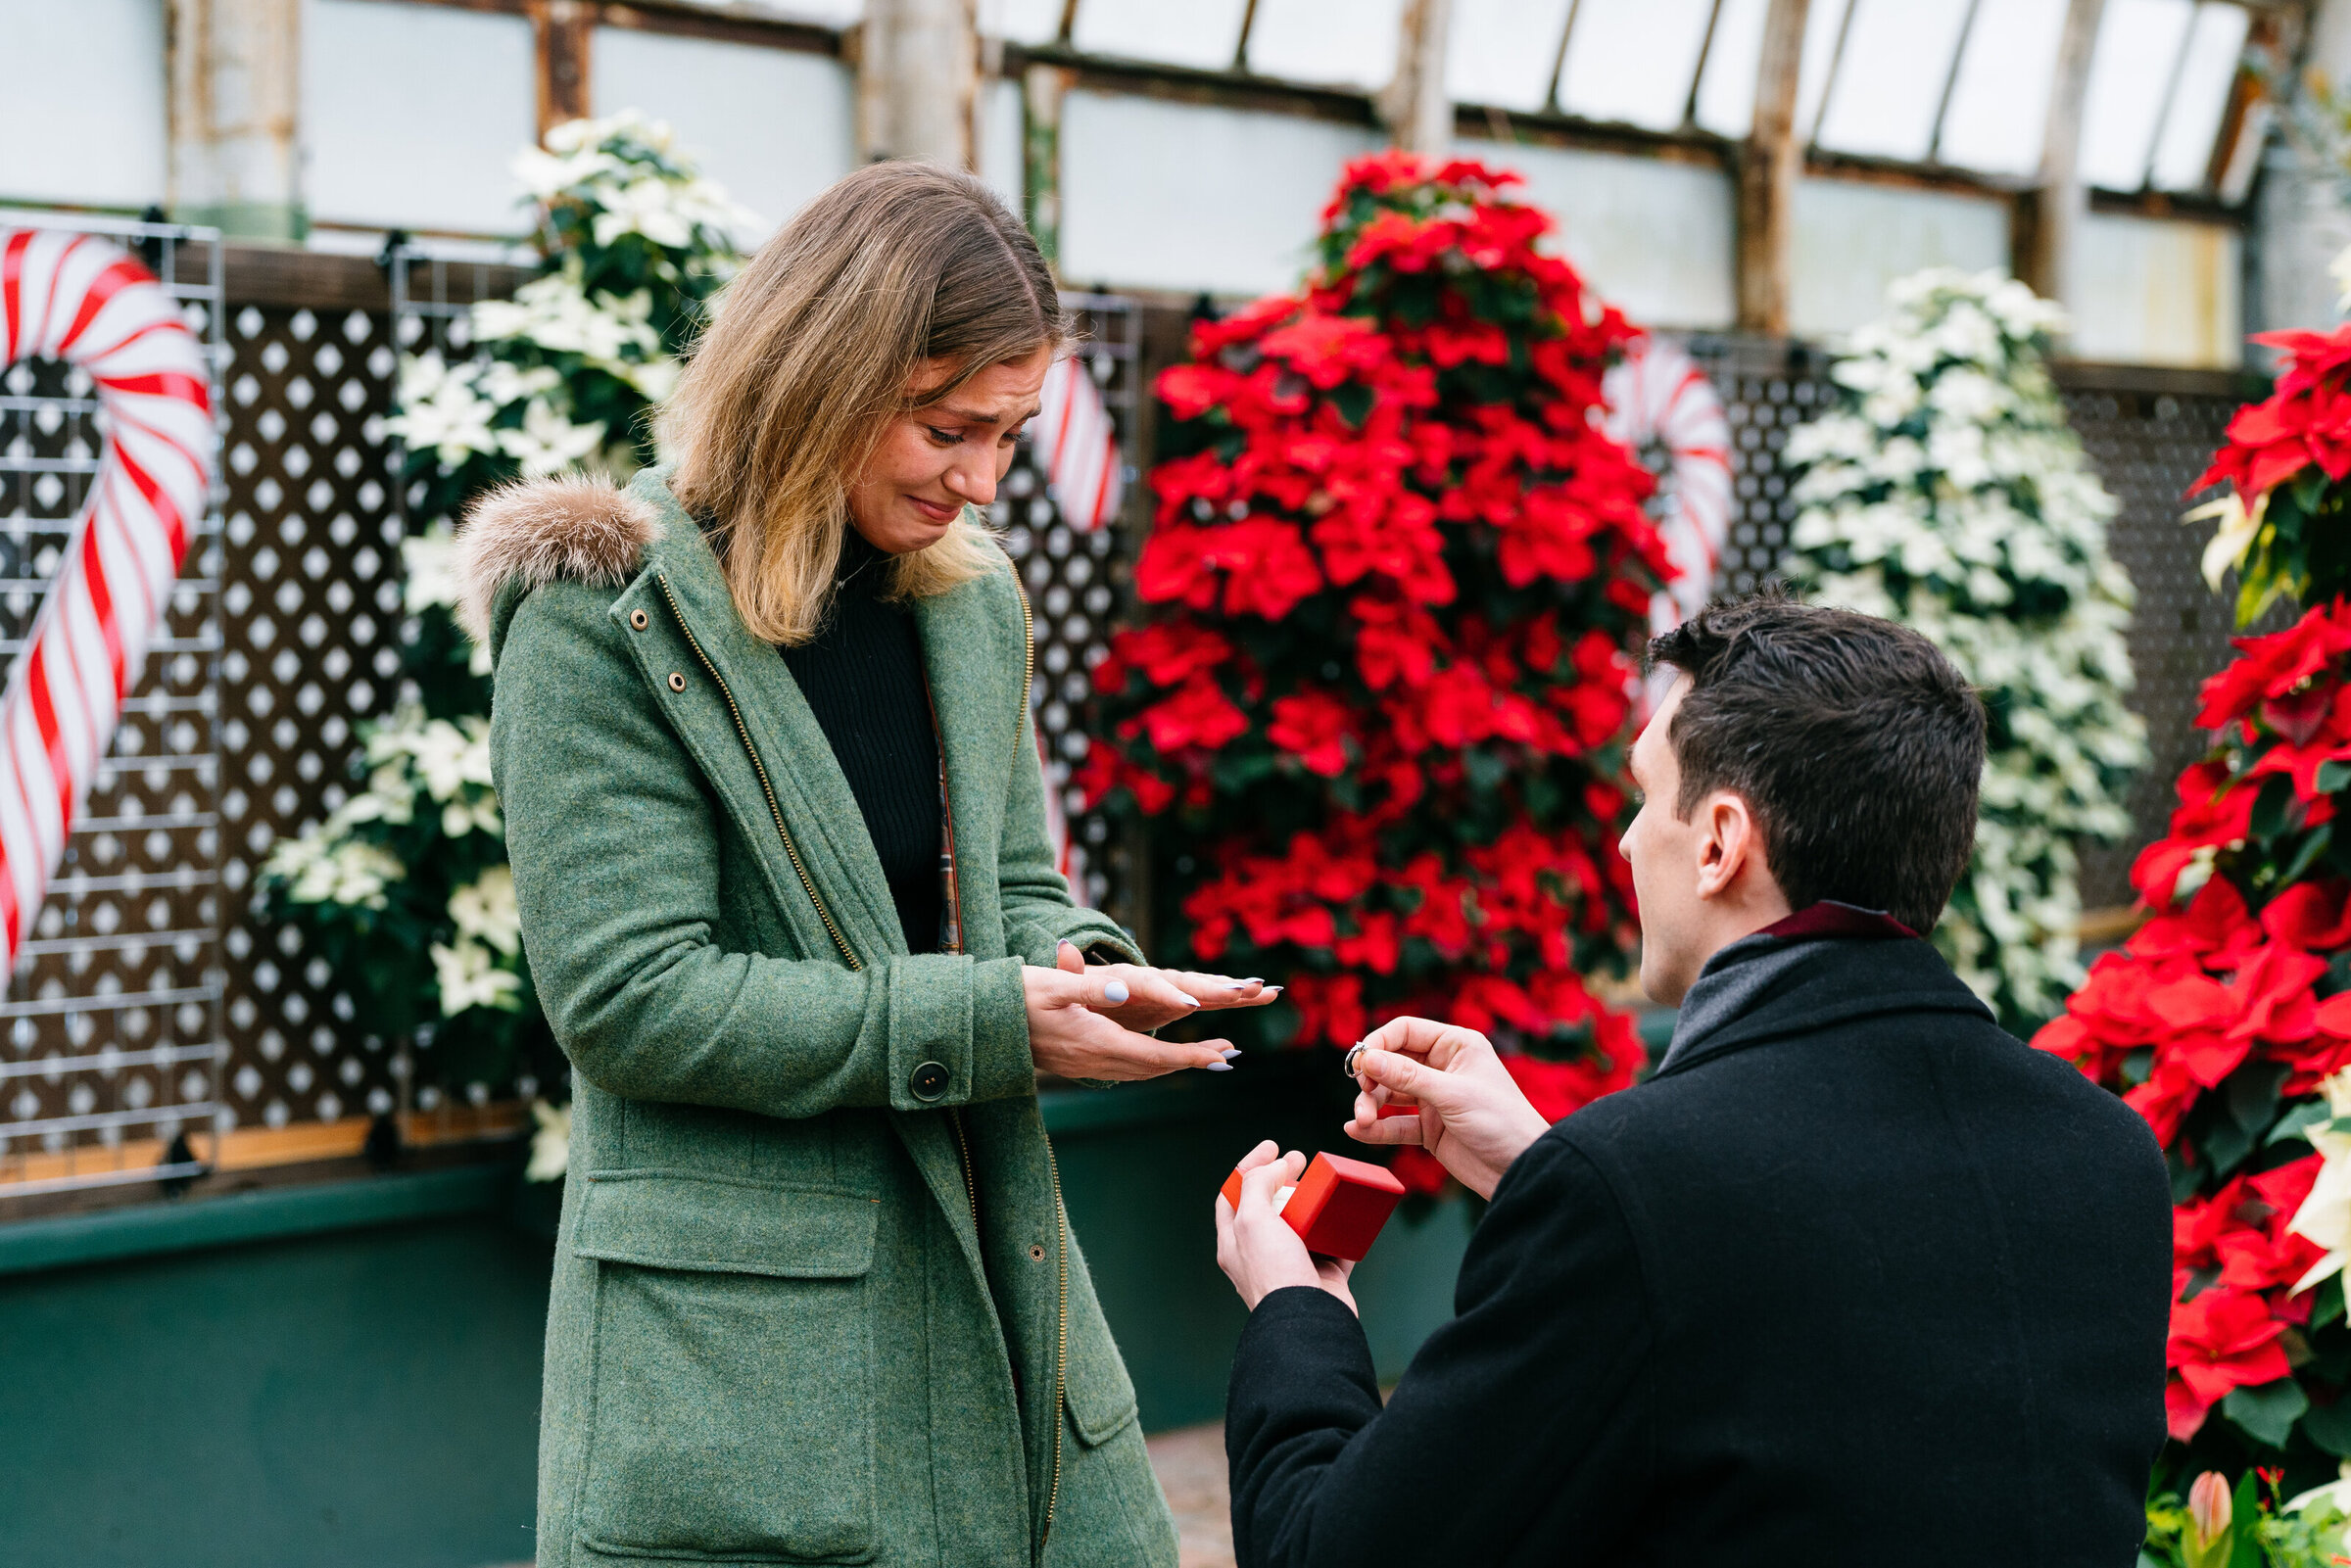 Emotional winter proposal at Chicago's Lincoln Park Conservatory